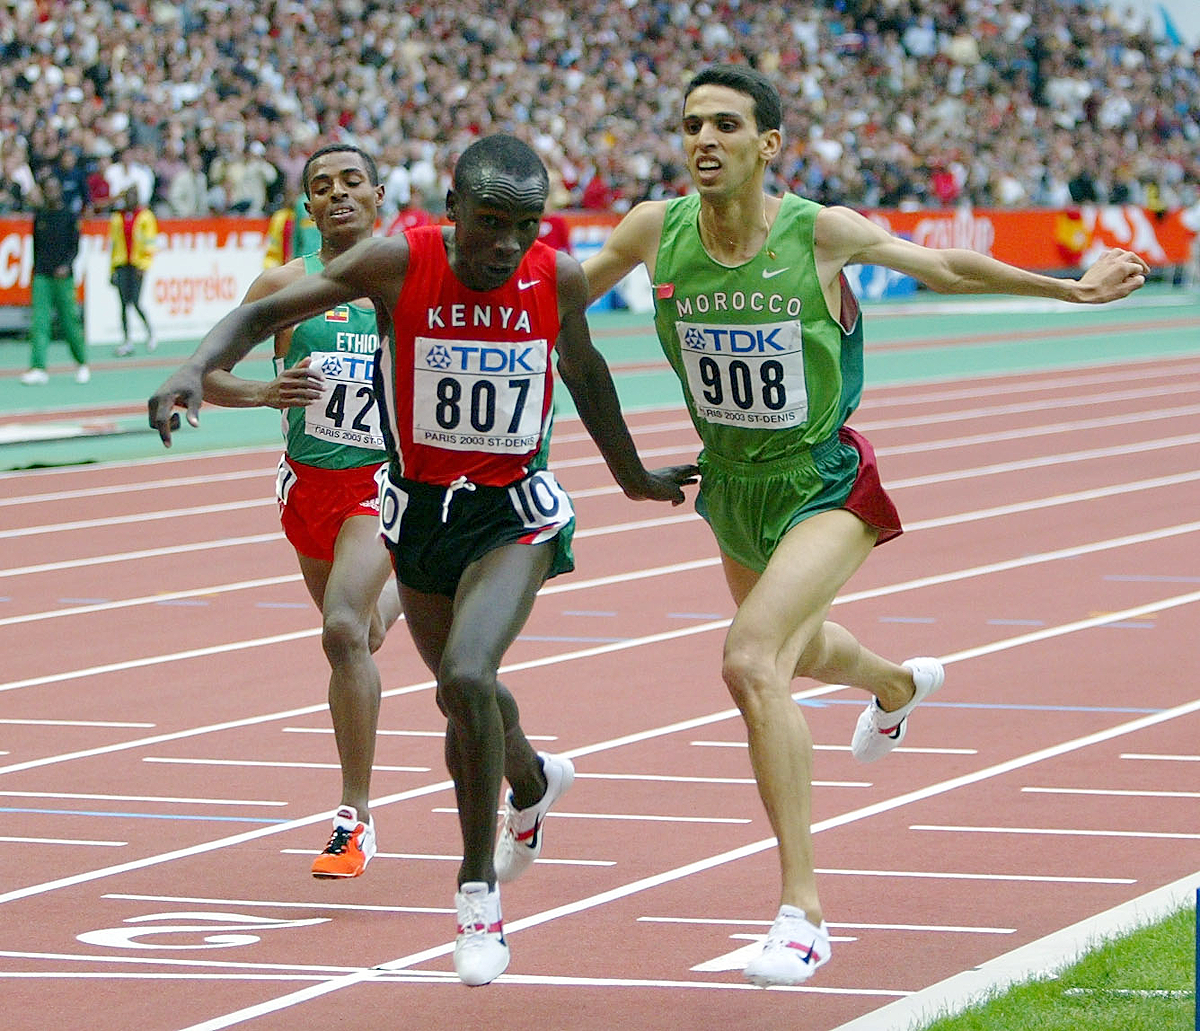 Eliud Kipchoge outdips Hicham El Guerrouj in the 5000m at the 2003 IAAF World Championships